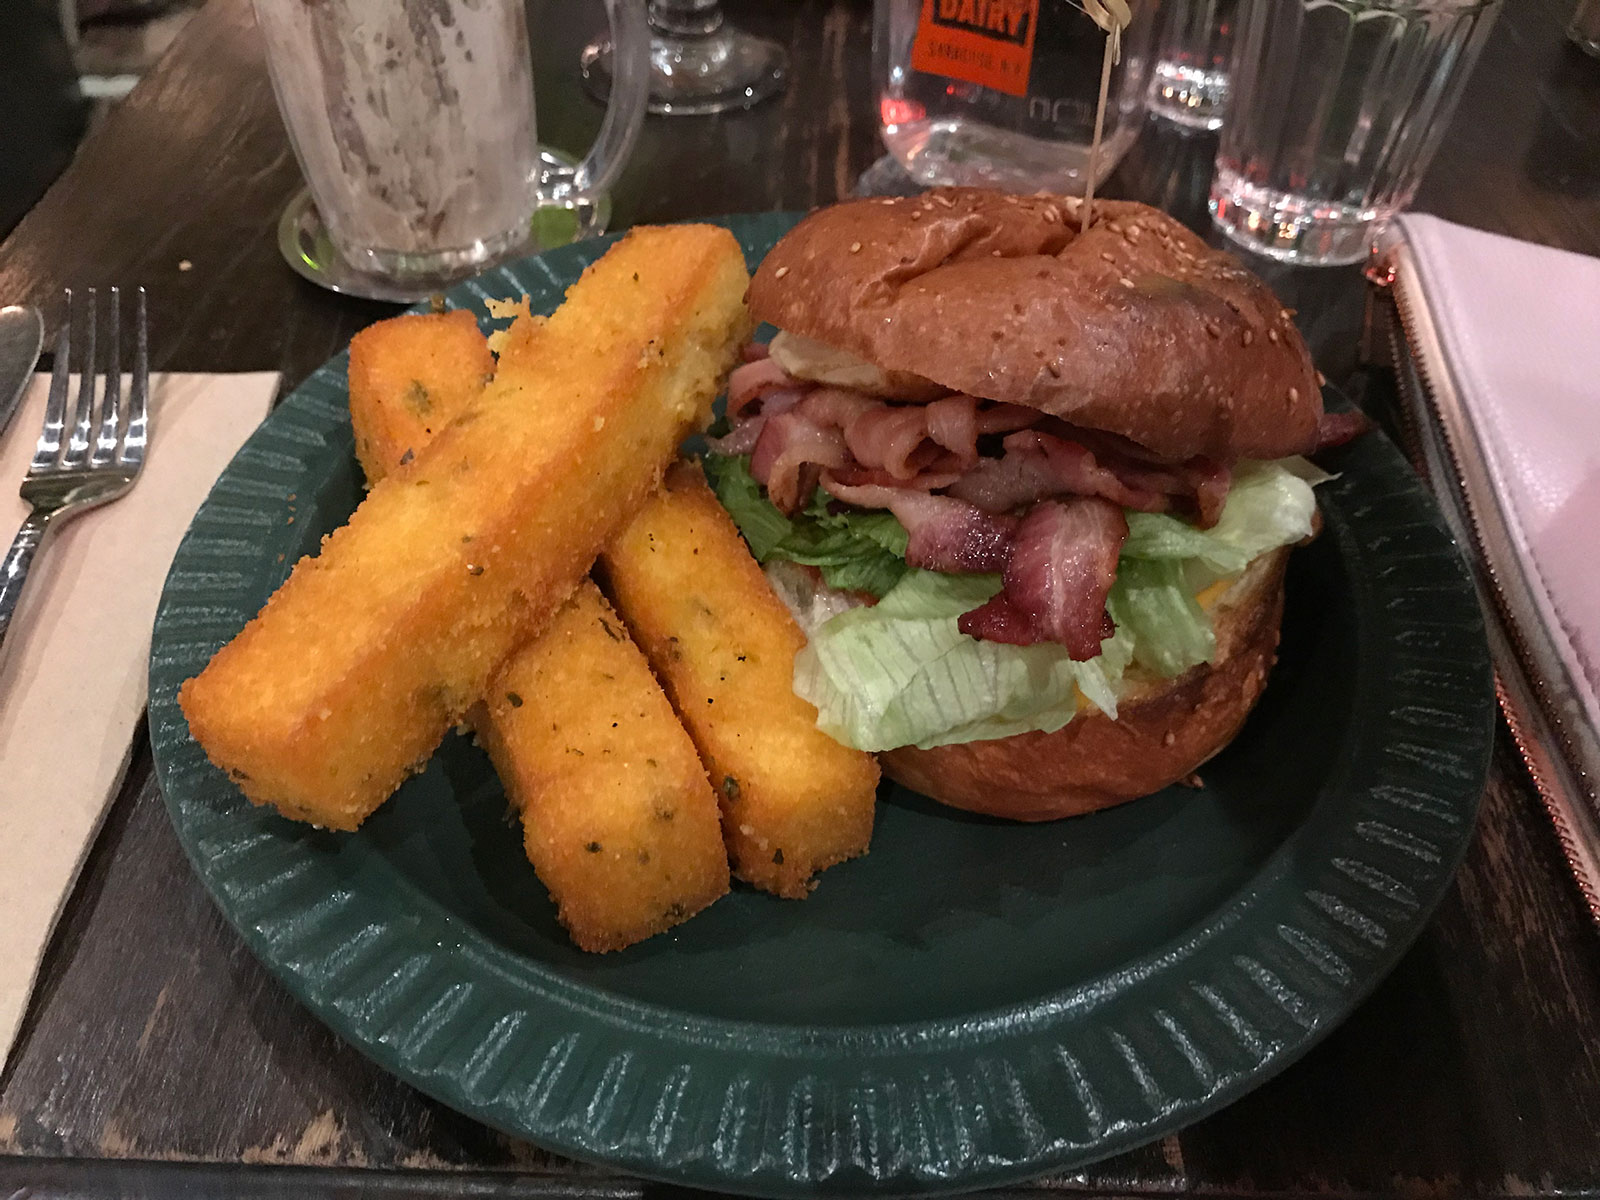 Three large rectangular yellow polenta chips, and a burger filled with visible lettuce and bacon, served on a dark green plate on a table.